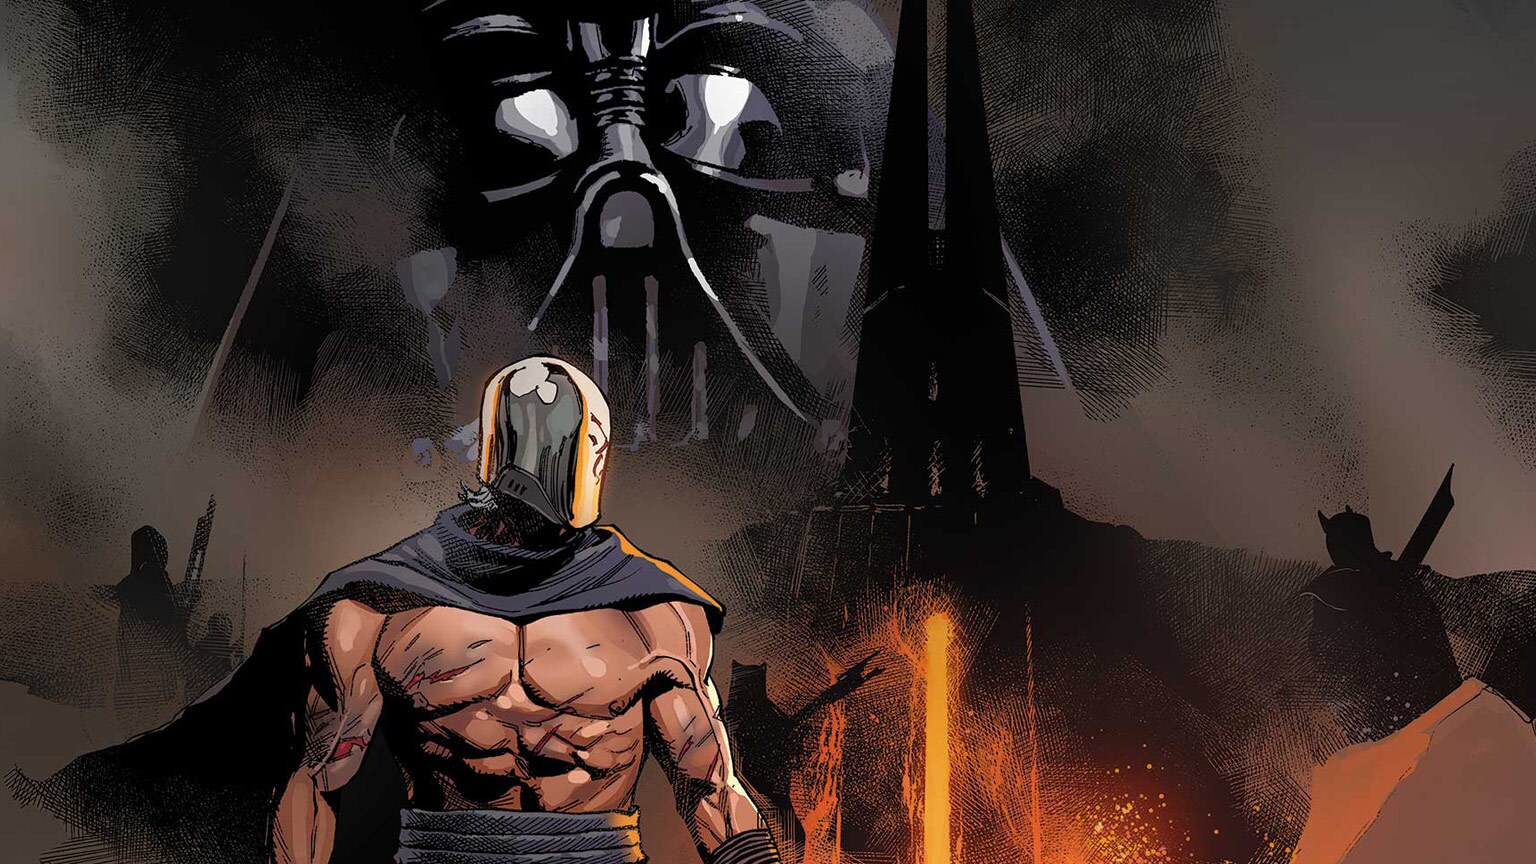 The Knights of Ren Strike in Crimson Reign, and More in Marvel’s April 2022 Star Wars Comics – Exclusive